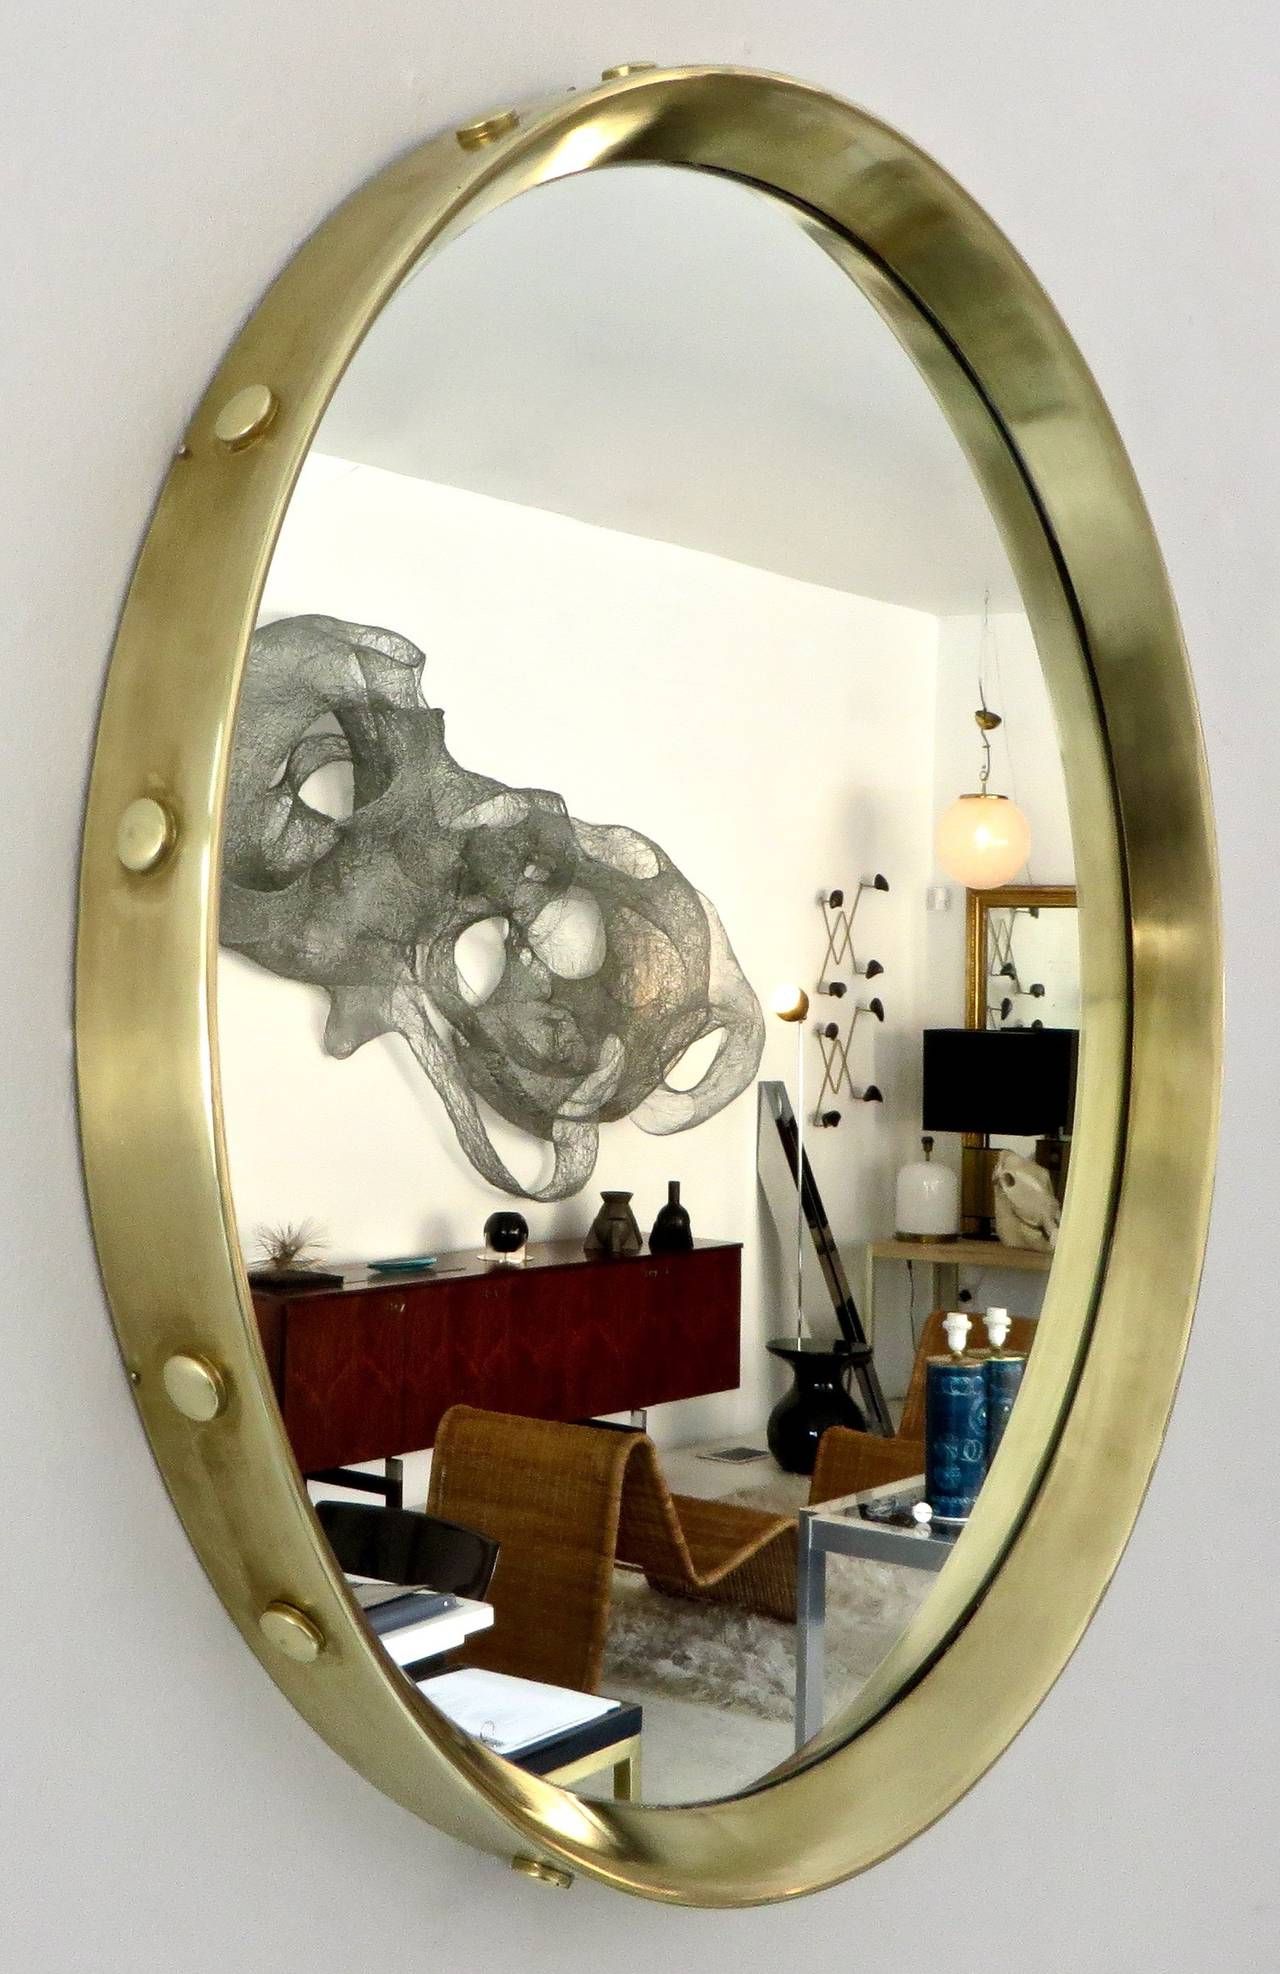 Newest Italian Round Brass Framed Mirror With Decorative Buttons At 1stdibs Inside Uneven Round Framed Wall Mirrors (View 12 of 15)